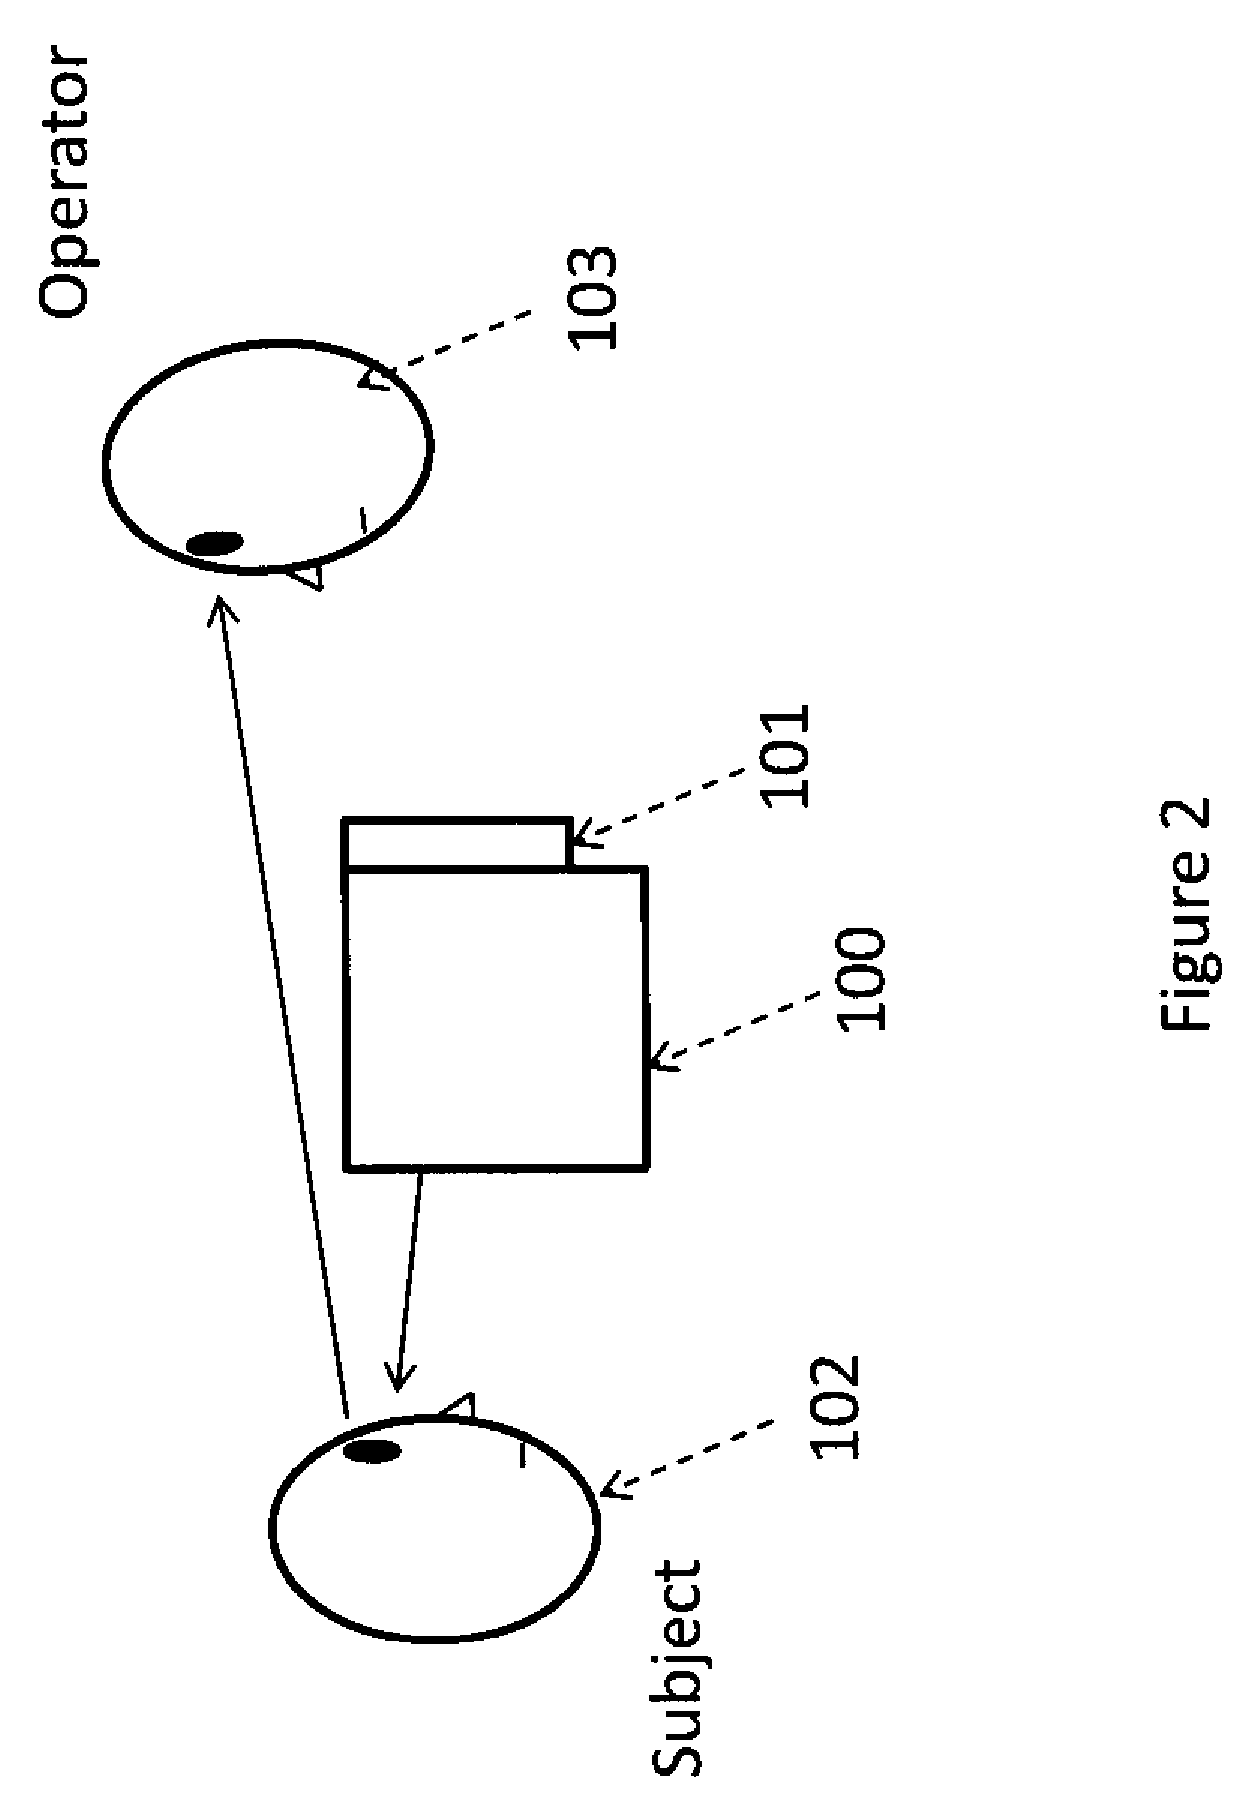 Operator interface for face and iris recognition devices